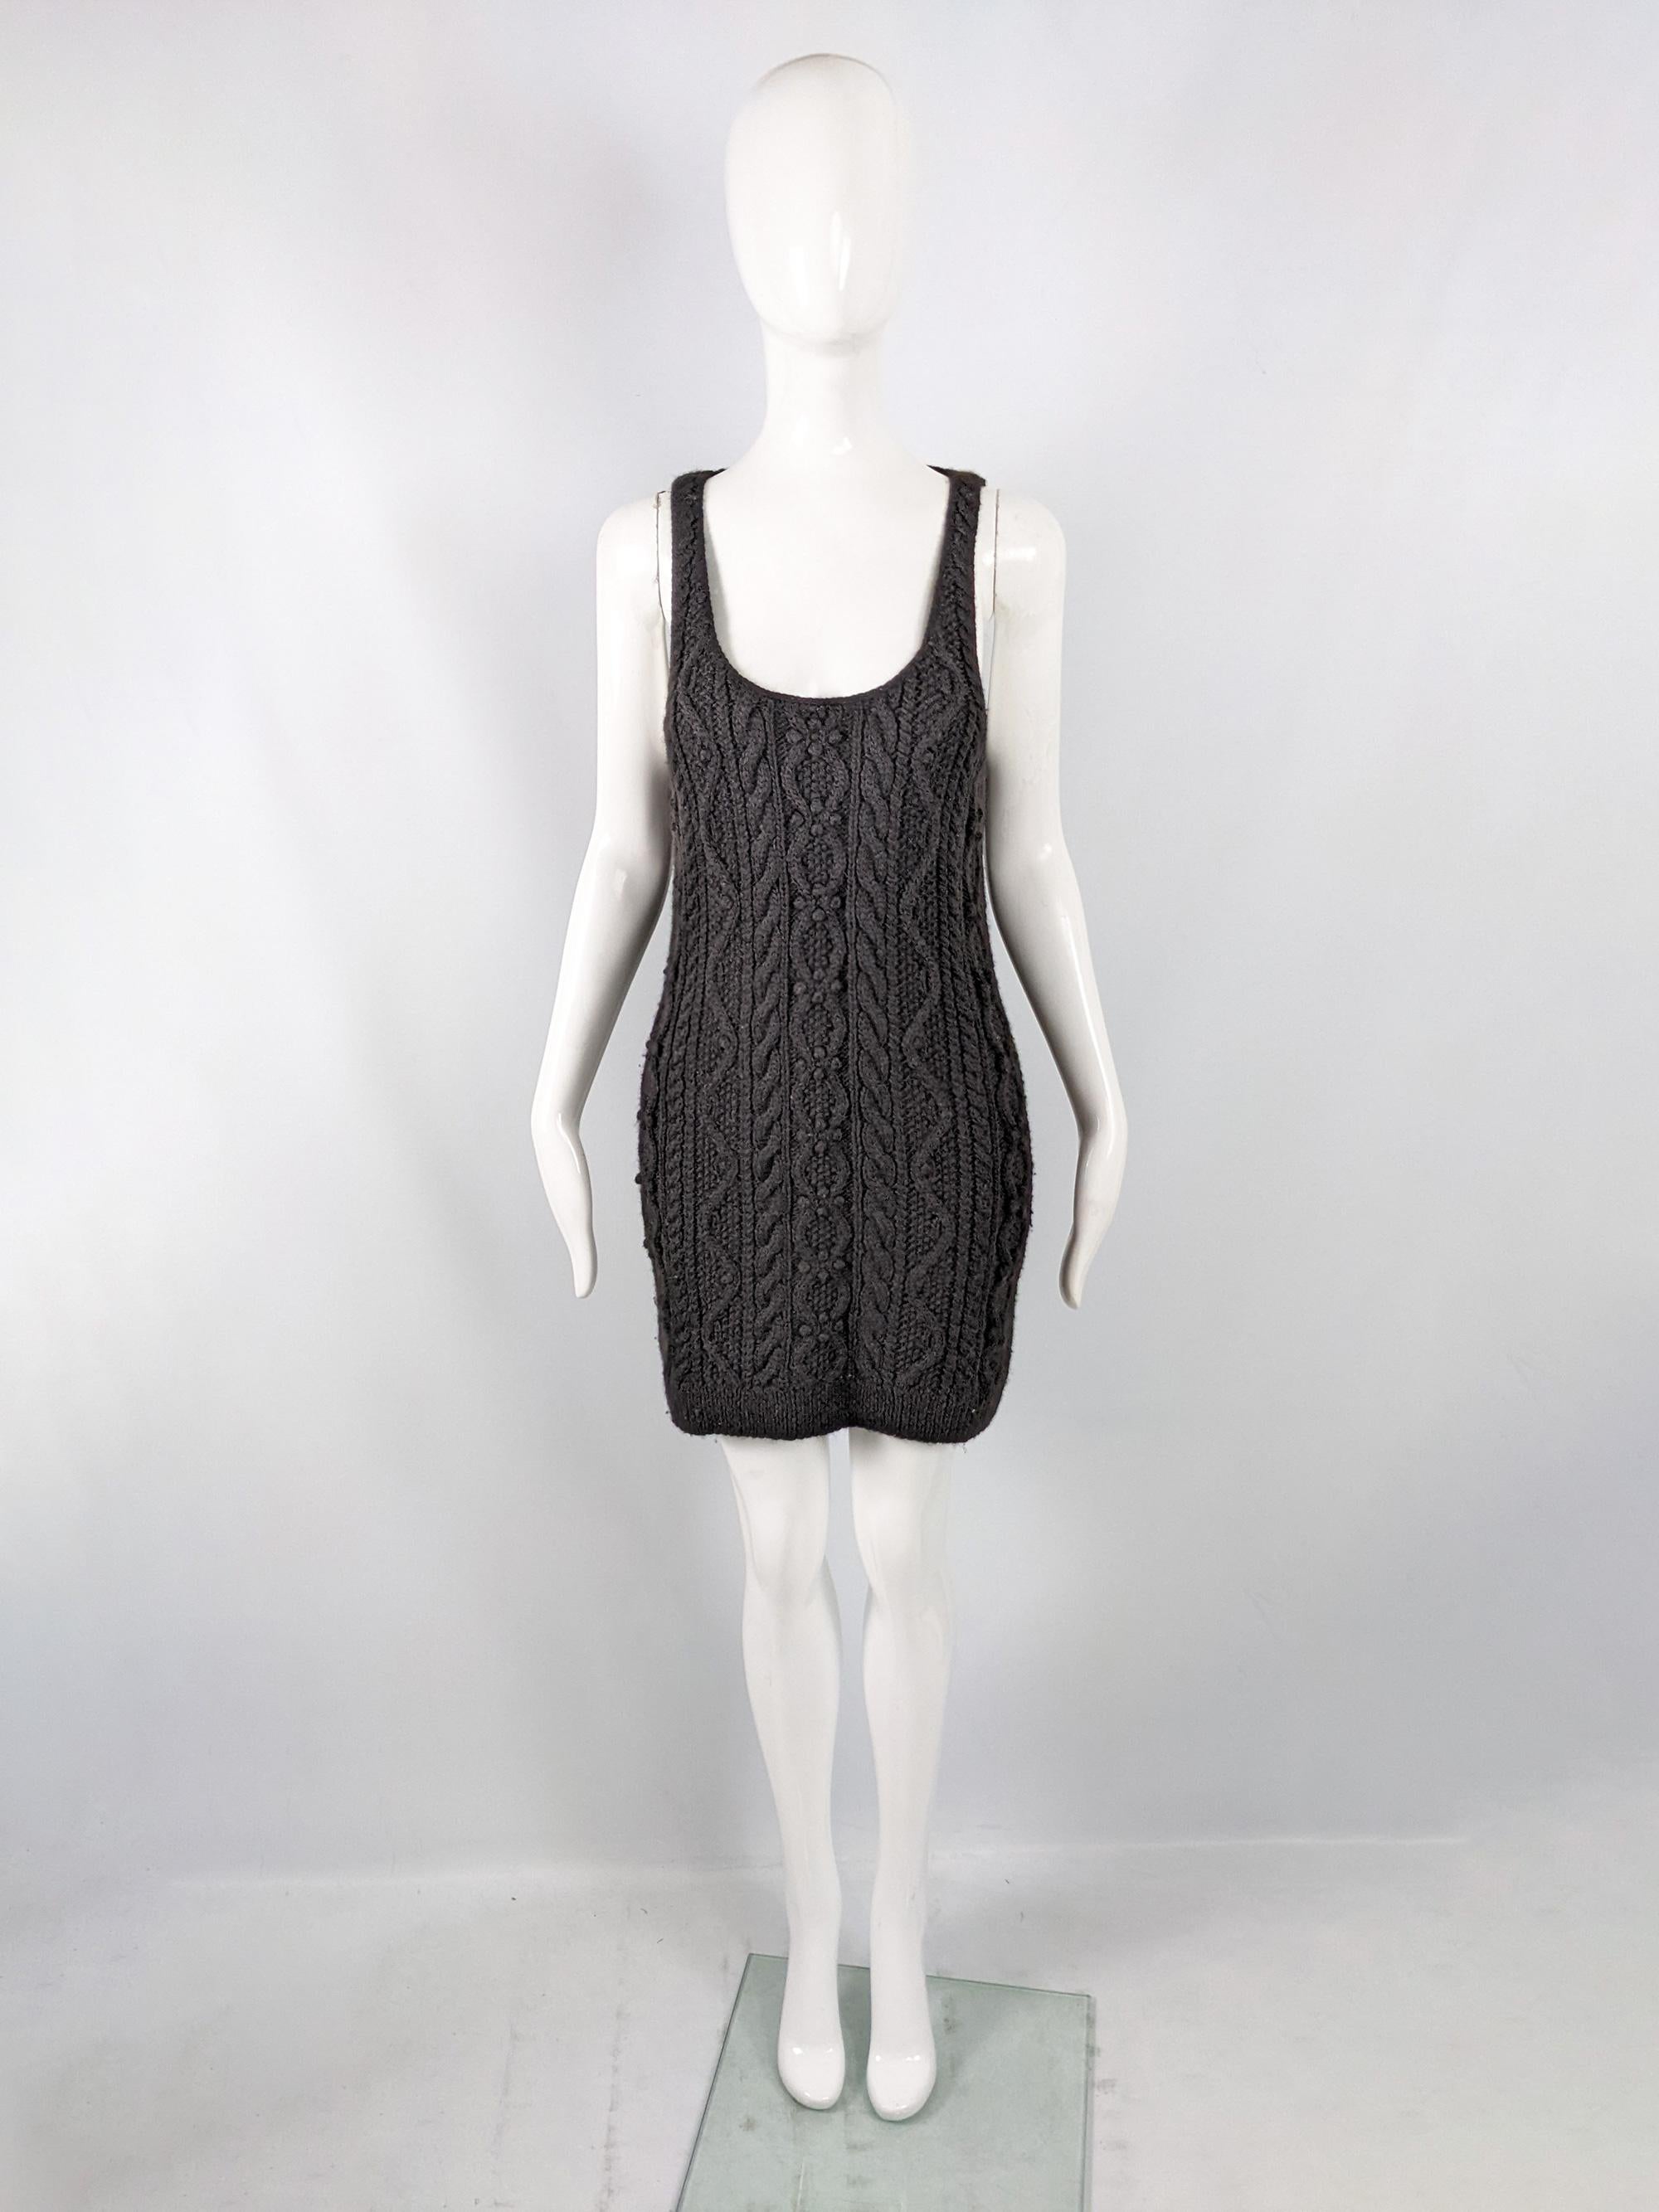 A chic vintage womens dress from the late 90s by luxury British fashion designer, Joseph. Hand knit, in a black wool cable knit fabric with a deep scoop neck and low sides which would make it perfect as a pinafore dress.

Size: Marked S. Please